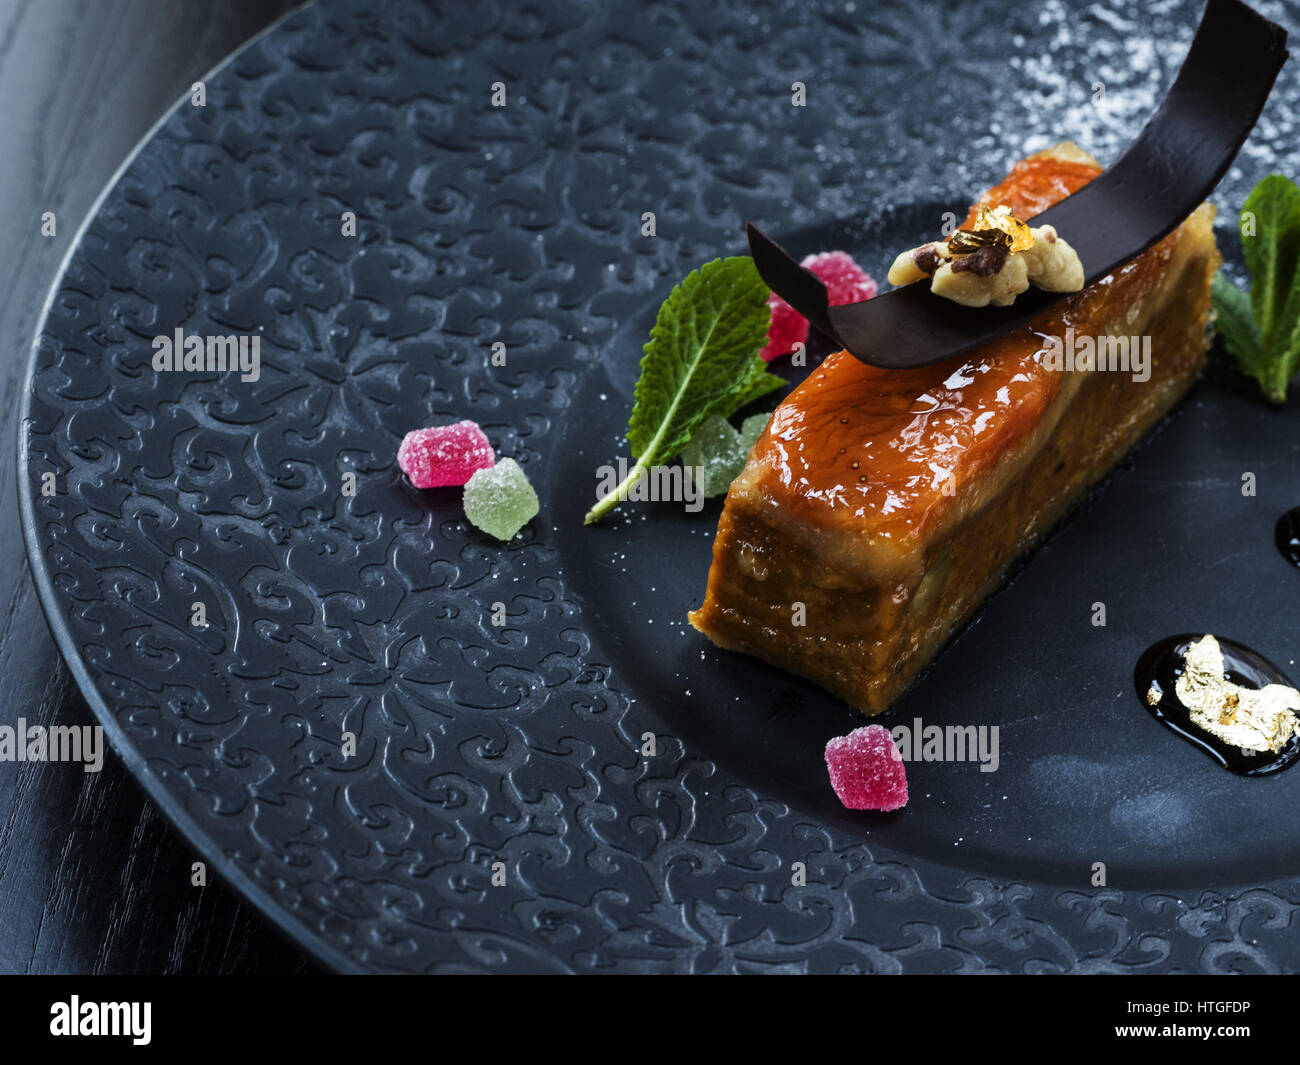 Marzipan dessert. 4th Mar, 2017. Marzipan is a confection consisting primarily of sugar or honey and almond meal (ground almonds), sometimes augmented with almond oil or extract Credit: Igor Golovniov/ZUMA Wire/Alamy Live News Stock Photo